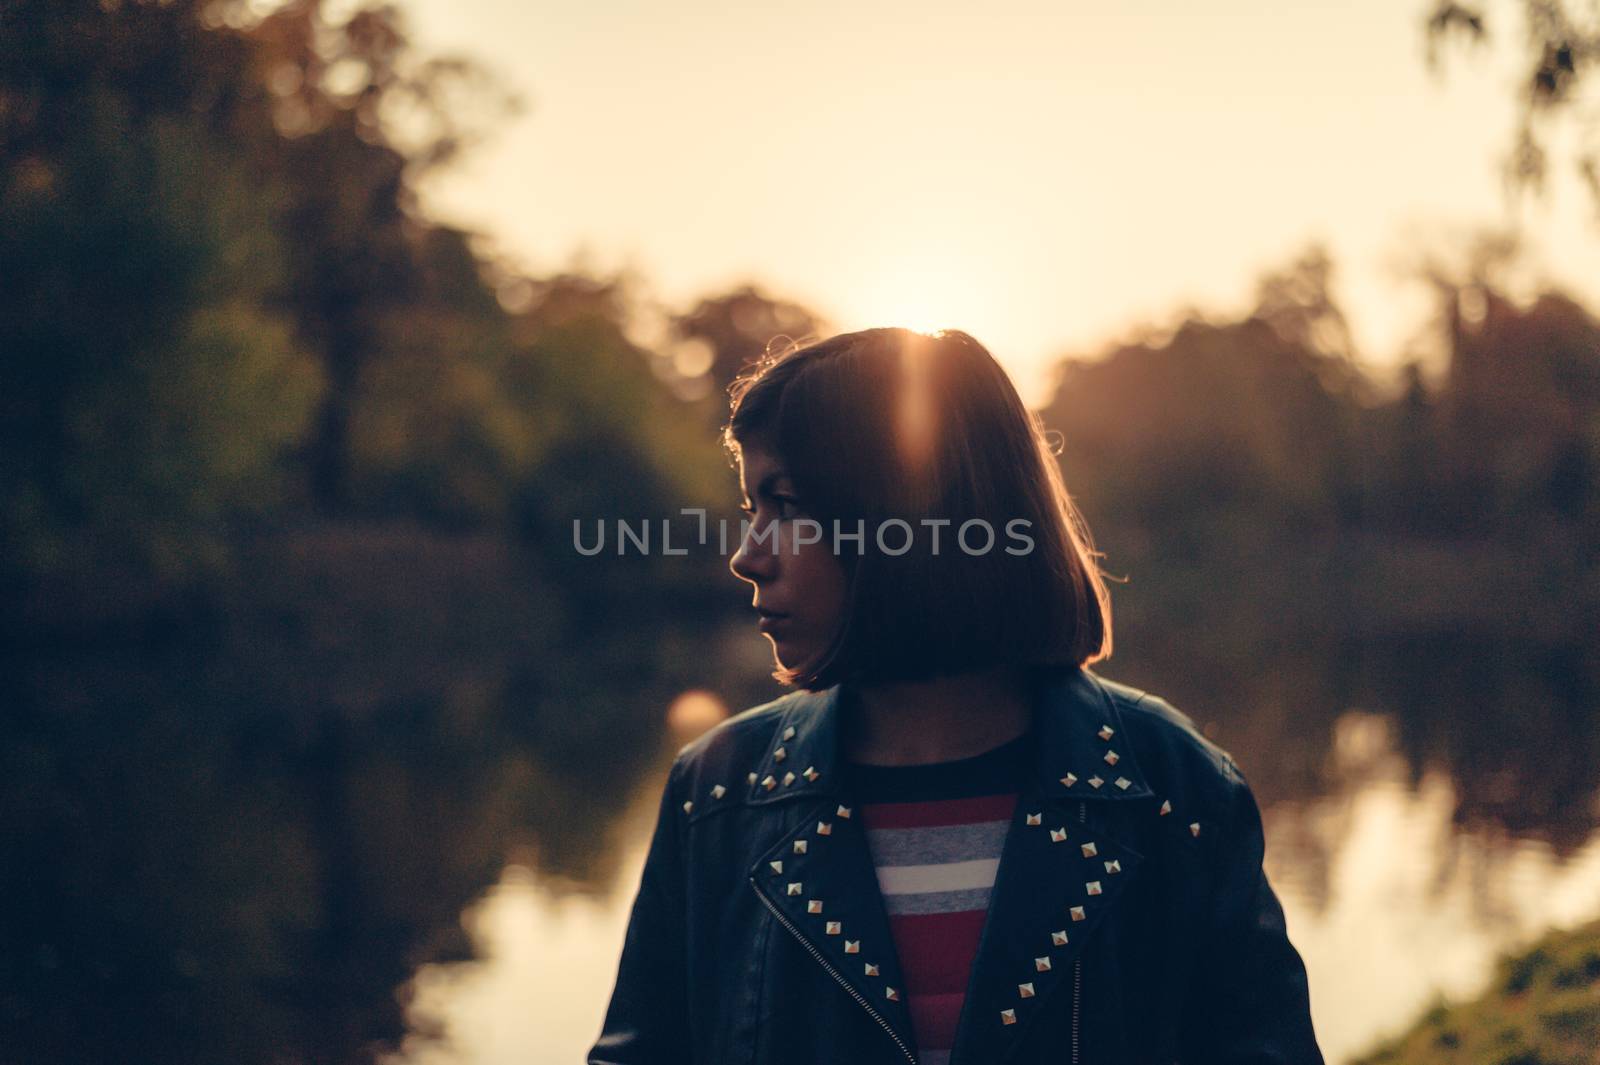 young girl in profile at dusk near a lake in a park by chernobrovin